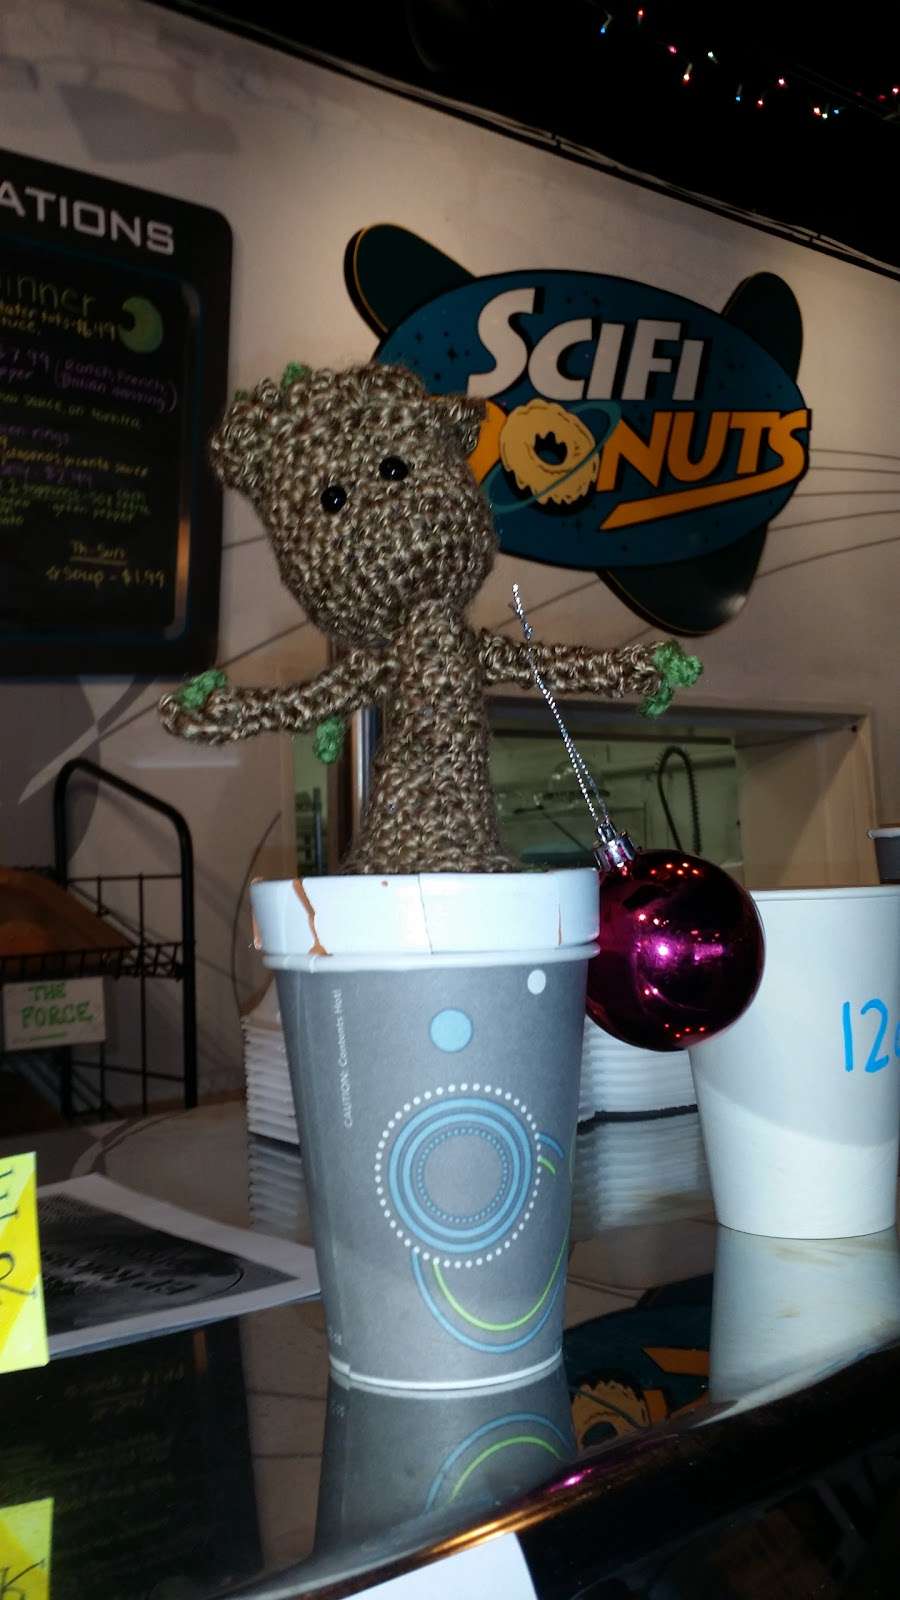 SciFi Donuts | 138 S Broad St, Griffith, IN 46319 | Phone: (219) 513-6880